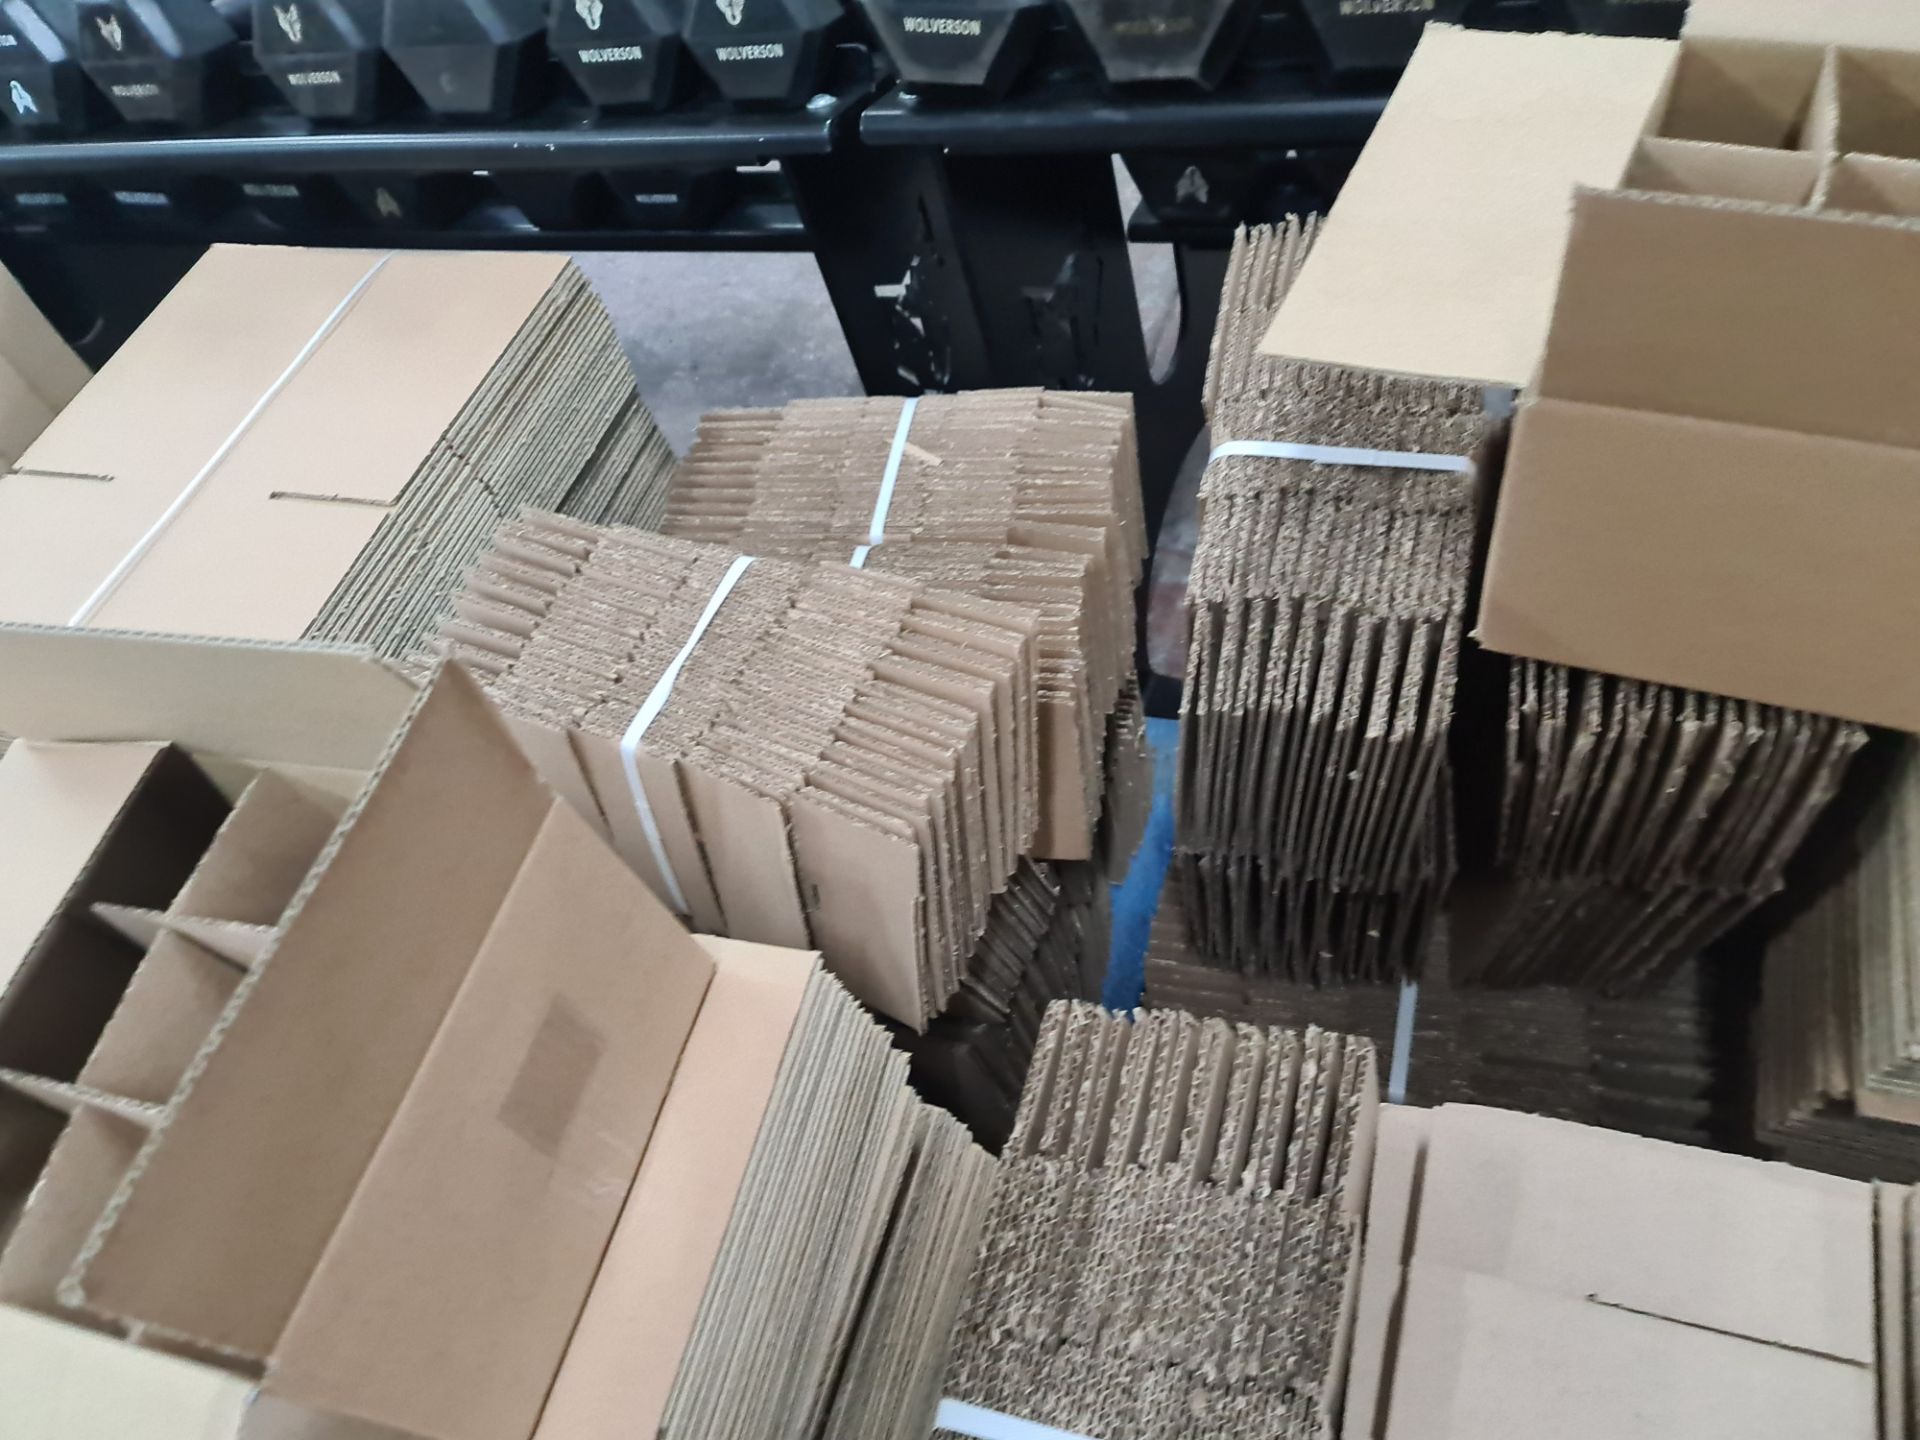 The contents of a pallet of cardboard boxes comprising approximately 300 boxes and 300 inserts in to - Image 6 of 10